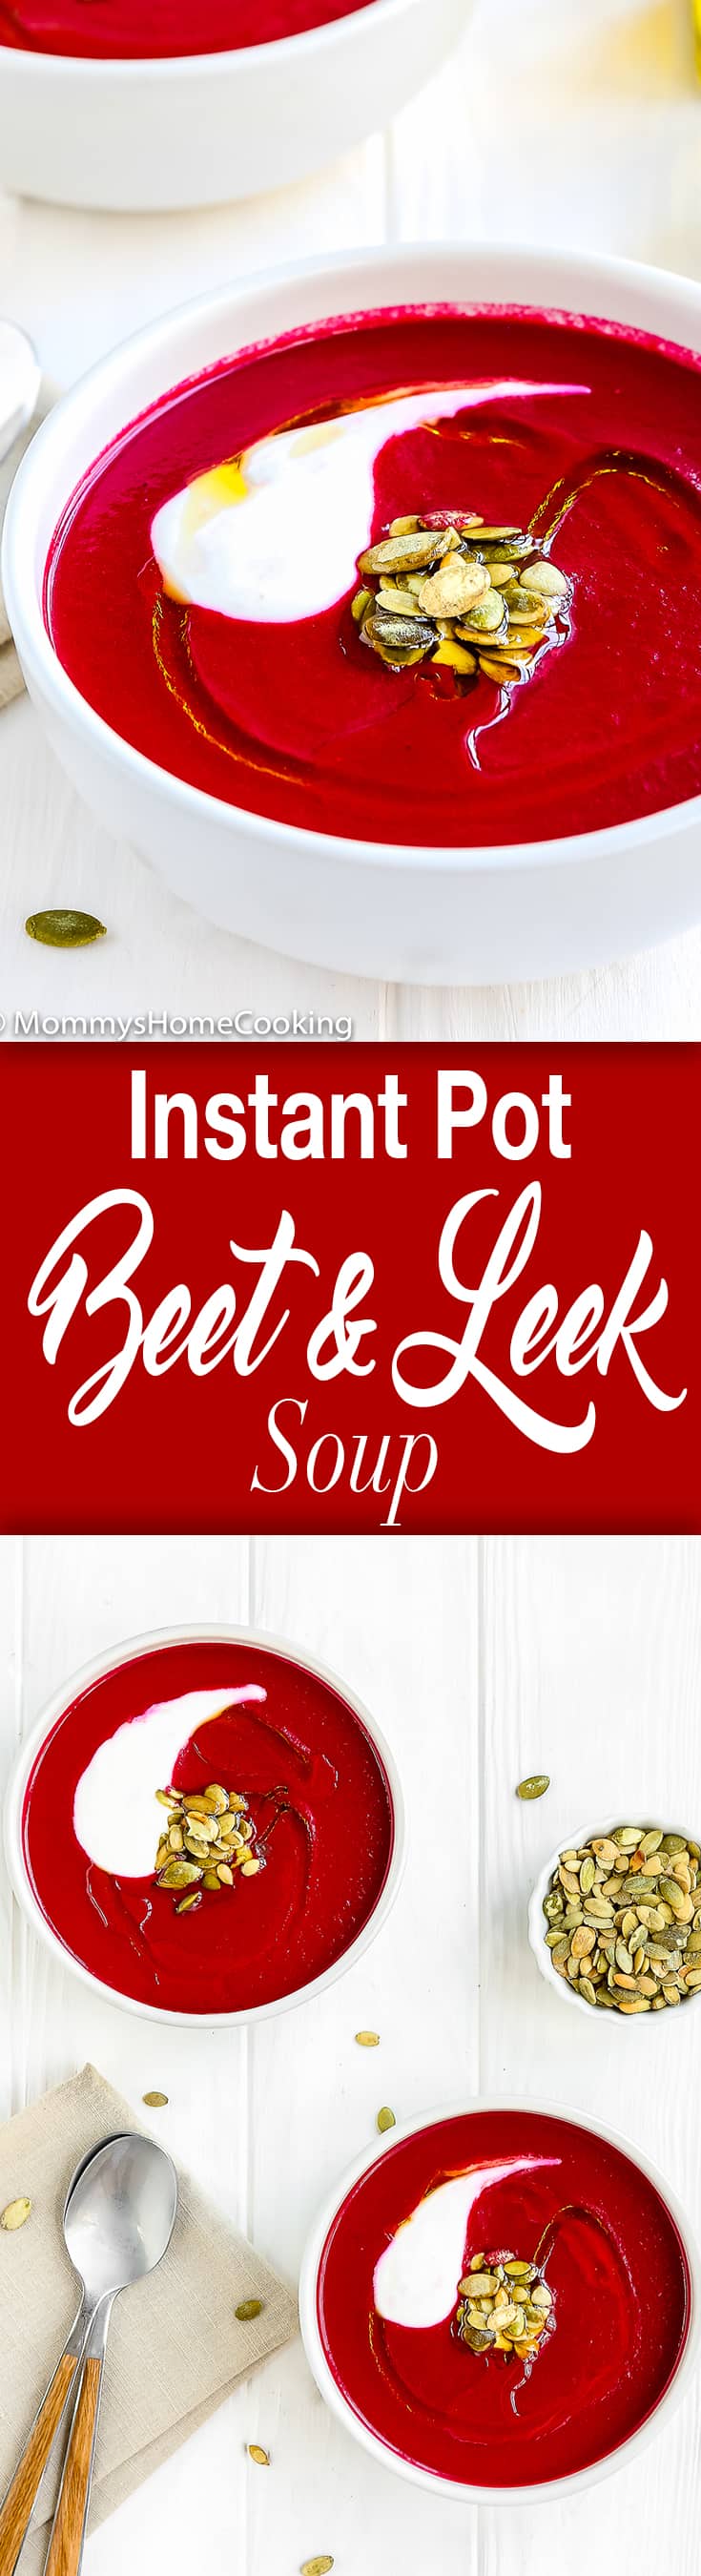 Easy Instant Pot Beet and Leek Soup | Mommy's Home Cooking